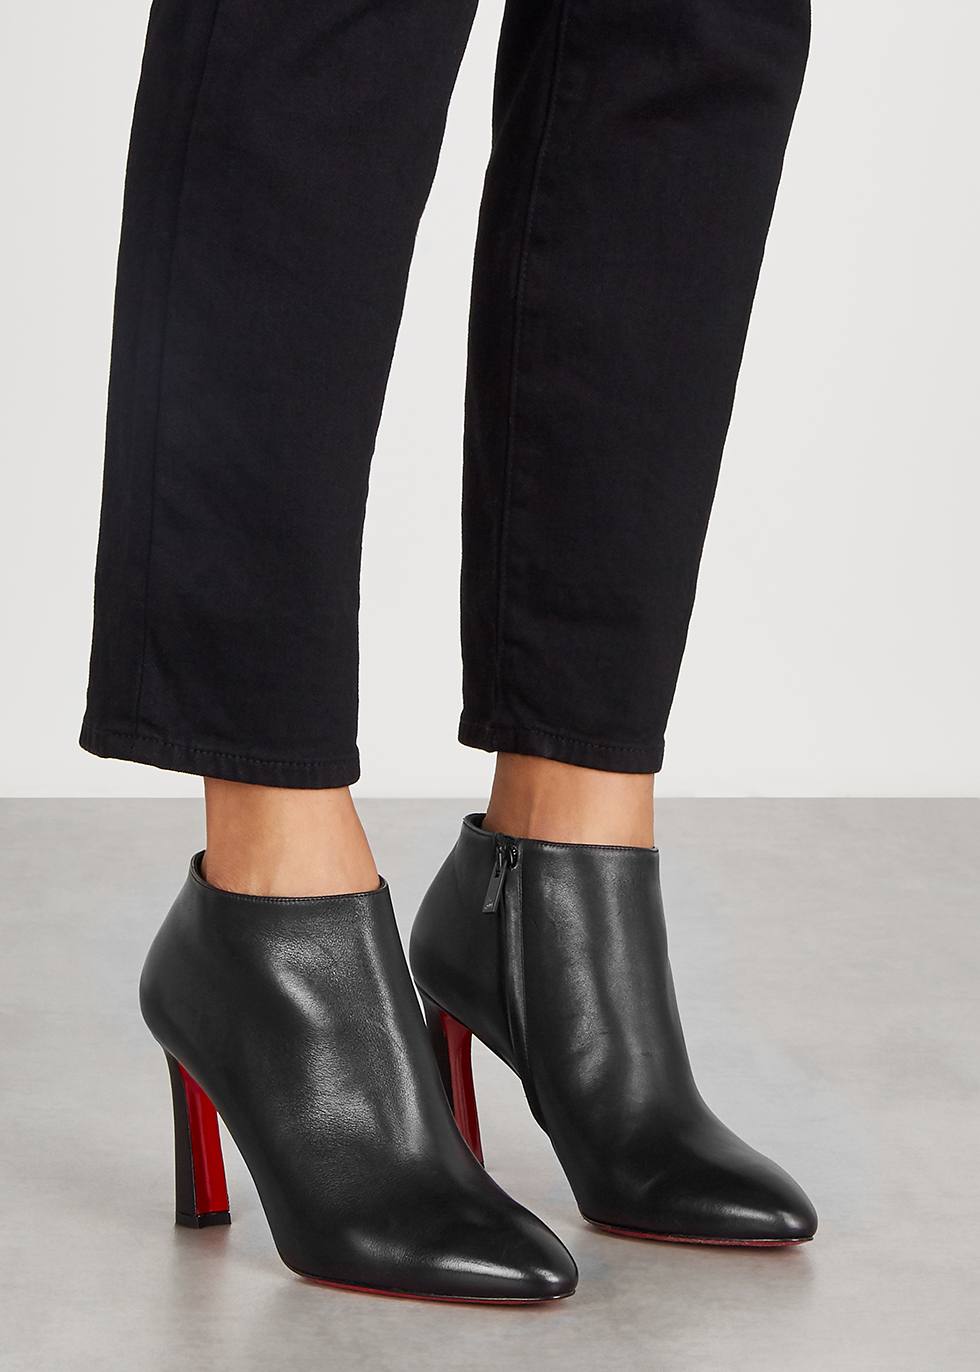 ankle boot louboutin